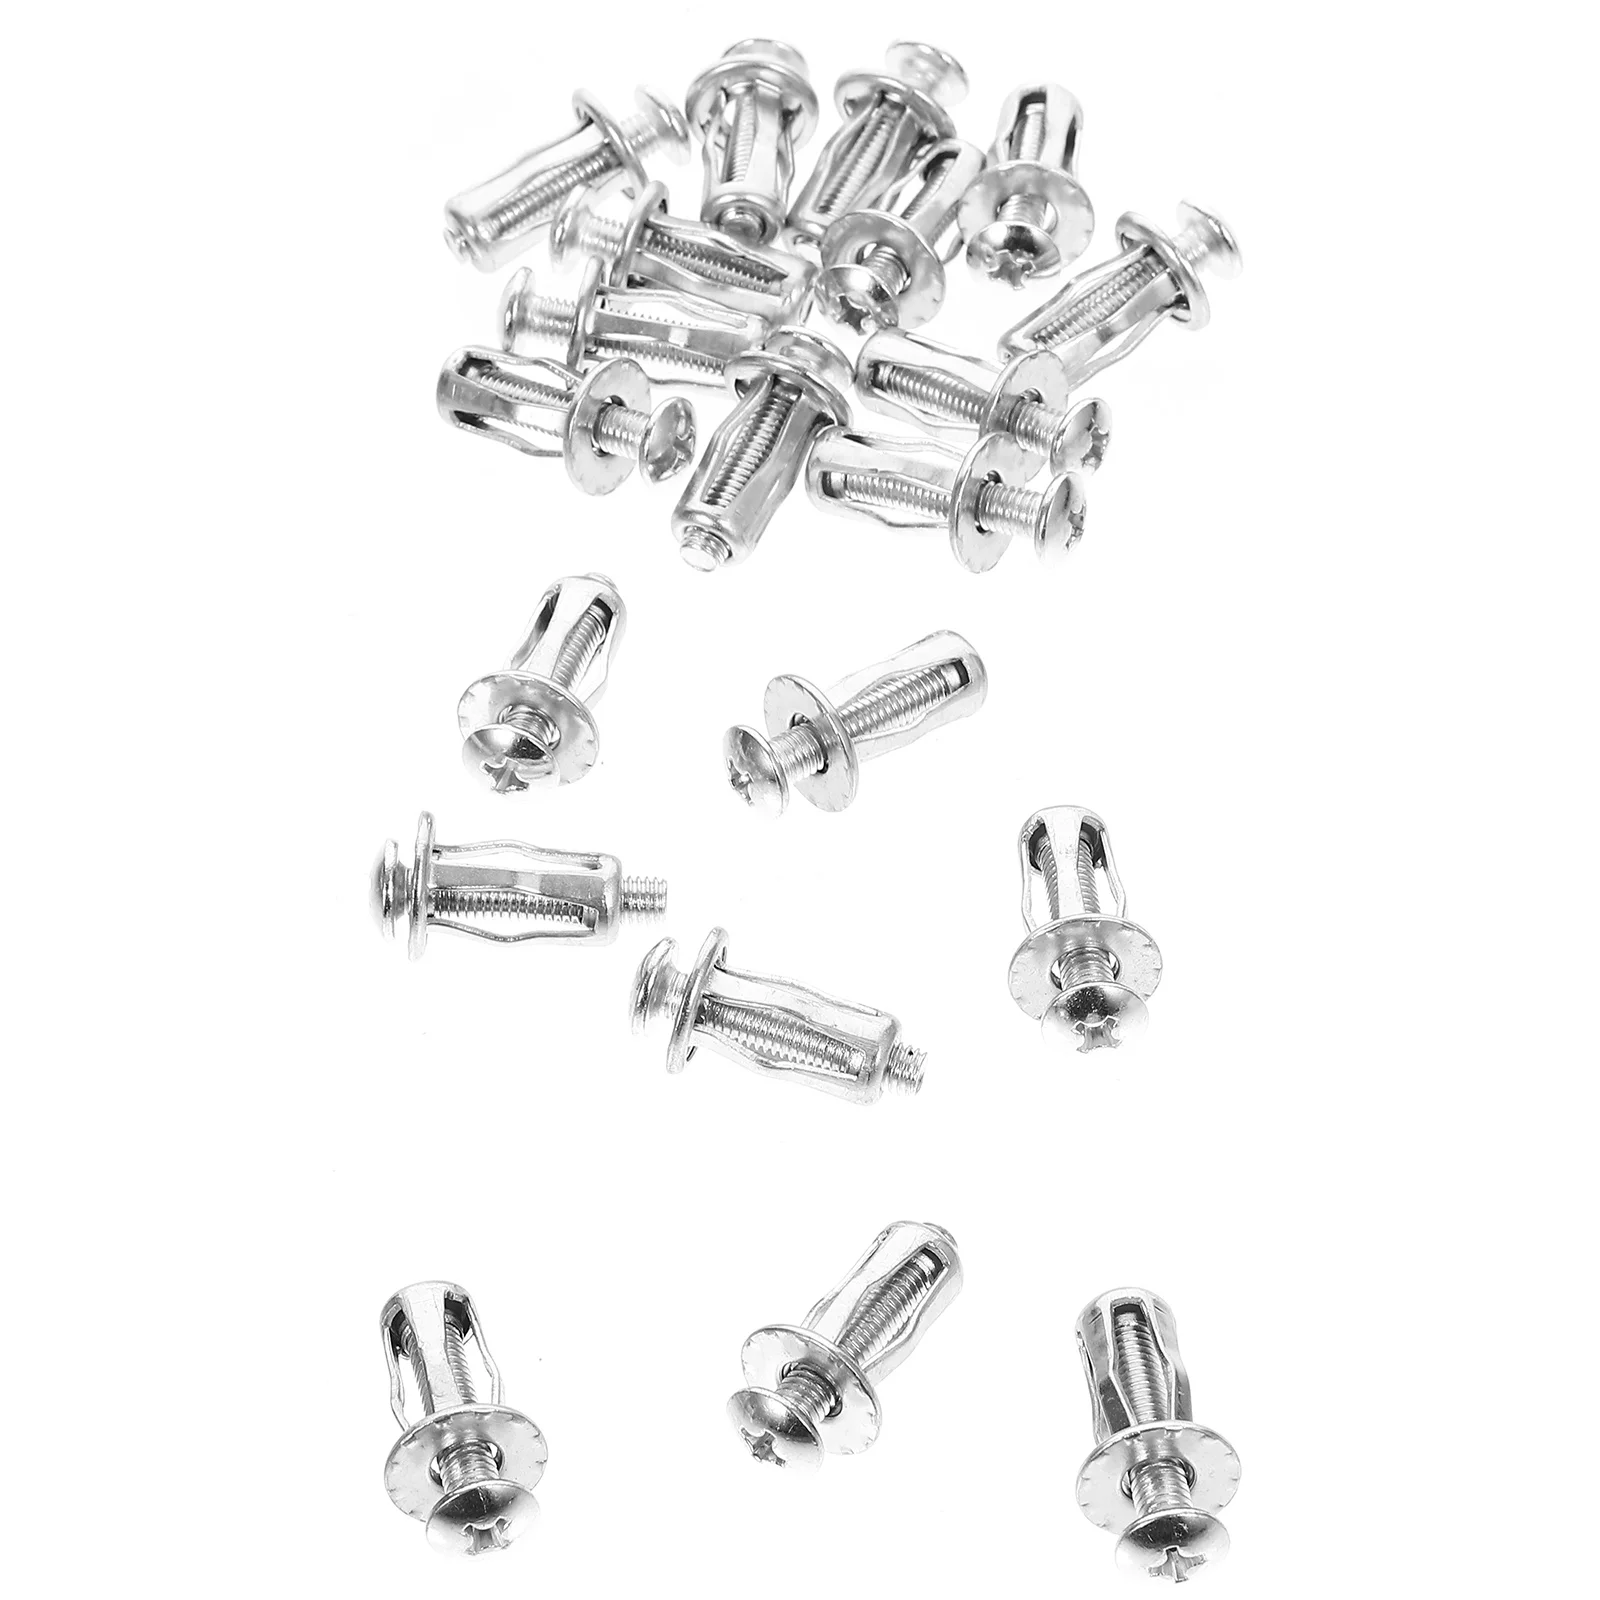 

20 Sets Cavity Fixing Hollow Door Anchor Wall Spline Lug Nuts Outdoor Screw Fasteners Galvanized Carbon Steel Expansion